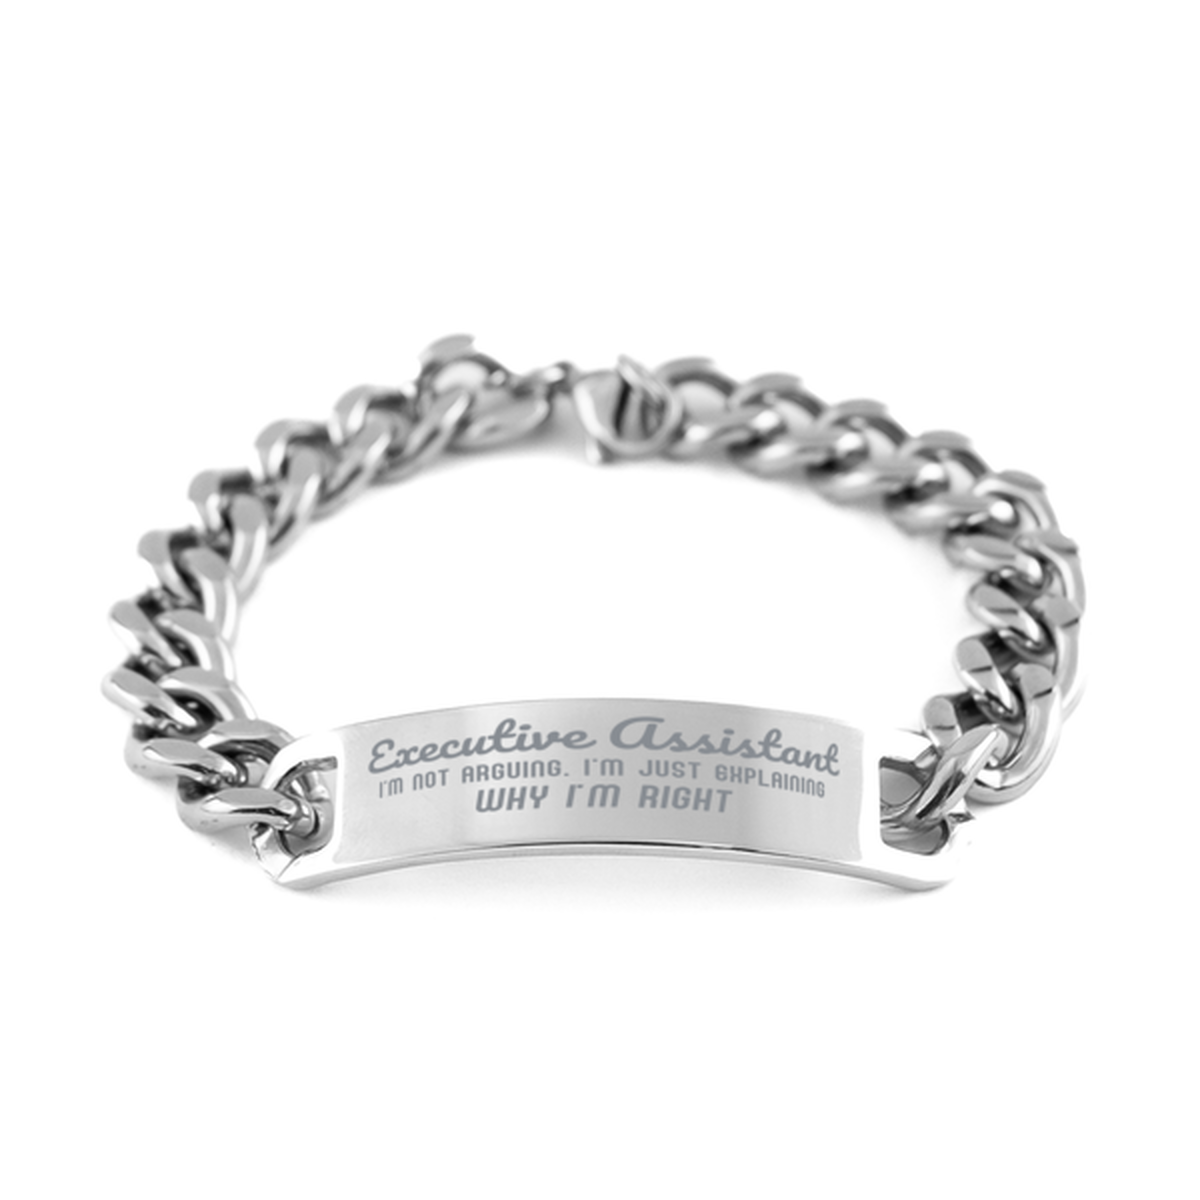 Executive Assistant I'm not Arguing. I'm Just Explaining Why I'm RIGHT Cuban Chain Stainless Steel Bracelet, Graduation Birthday Christmas Executive Assistant Gifts For Executive Assistant Funny Saying Quote Present for Men Women Coworker